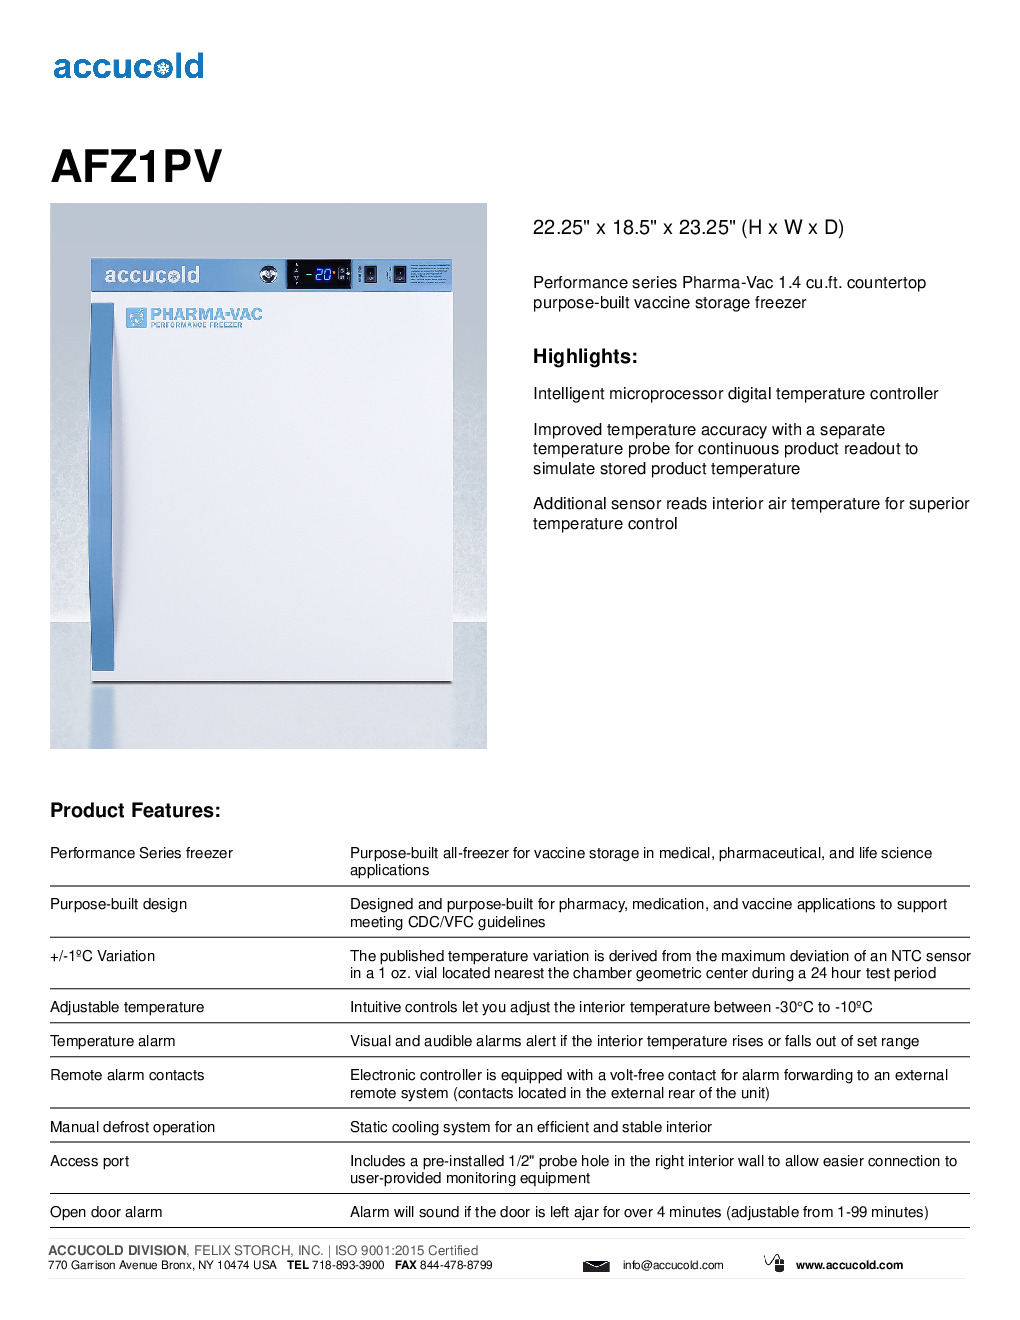 Accucold AFZ1PV Medical Freezer